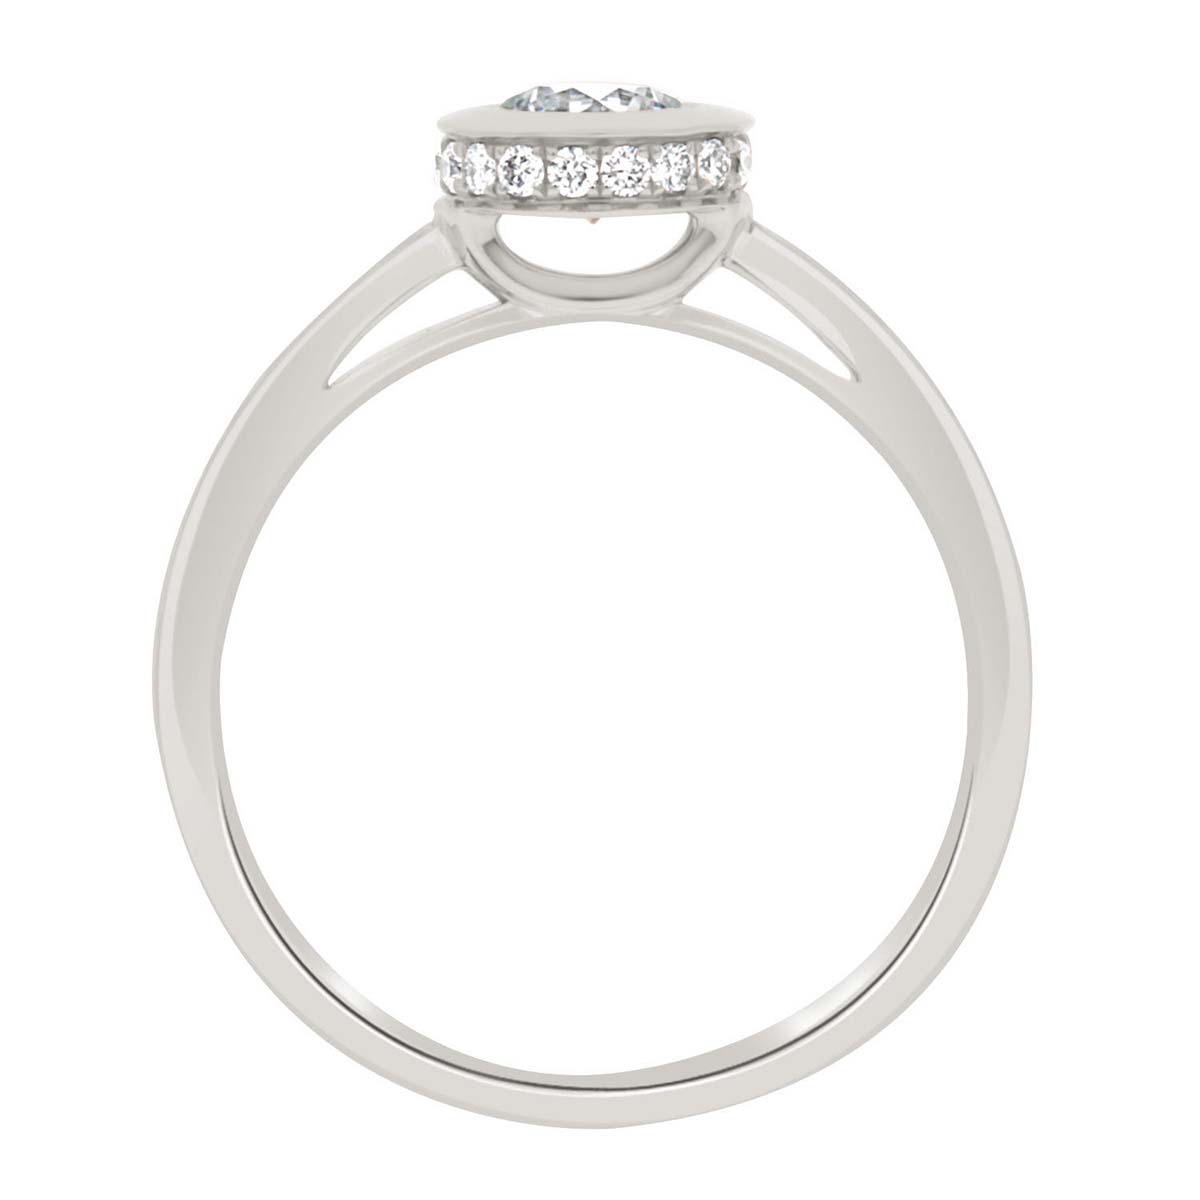 Bezel Engagement Ring made of white gold and diamonds in a vertical position